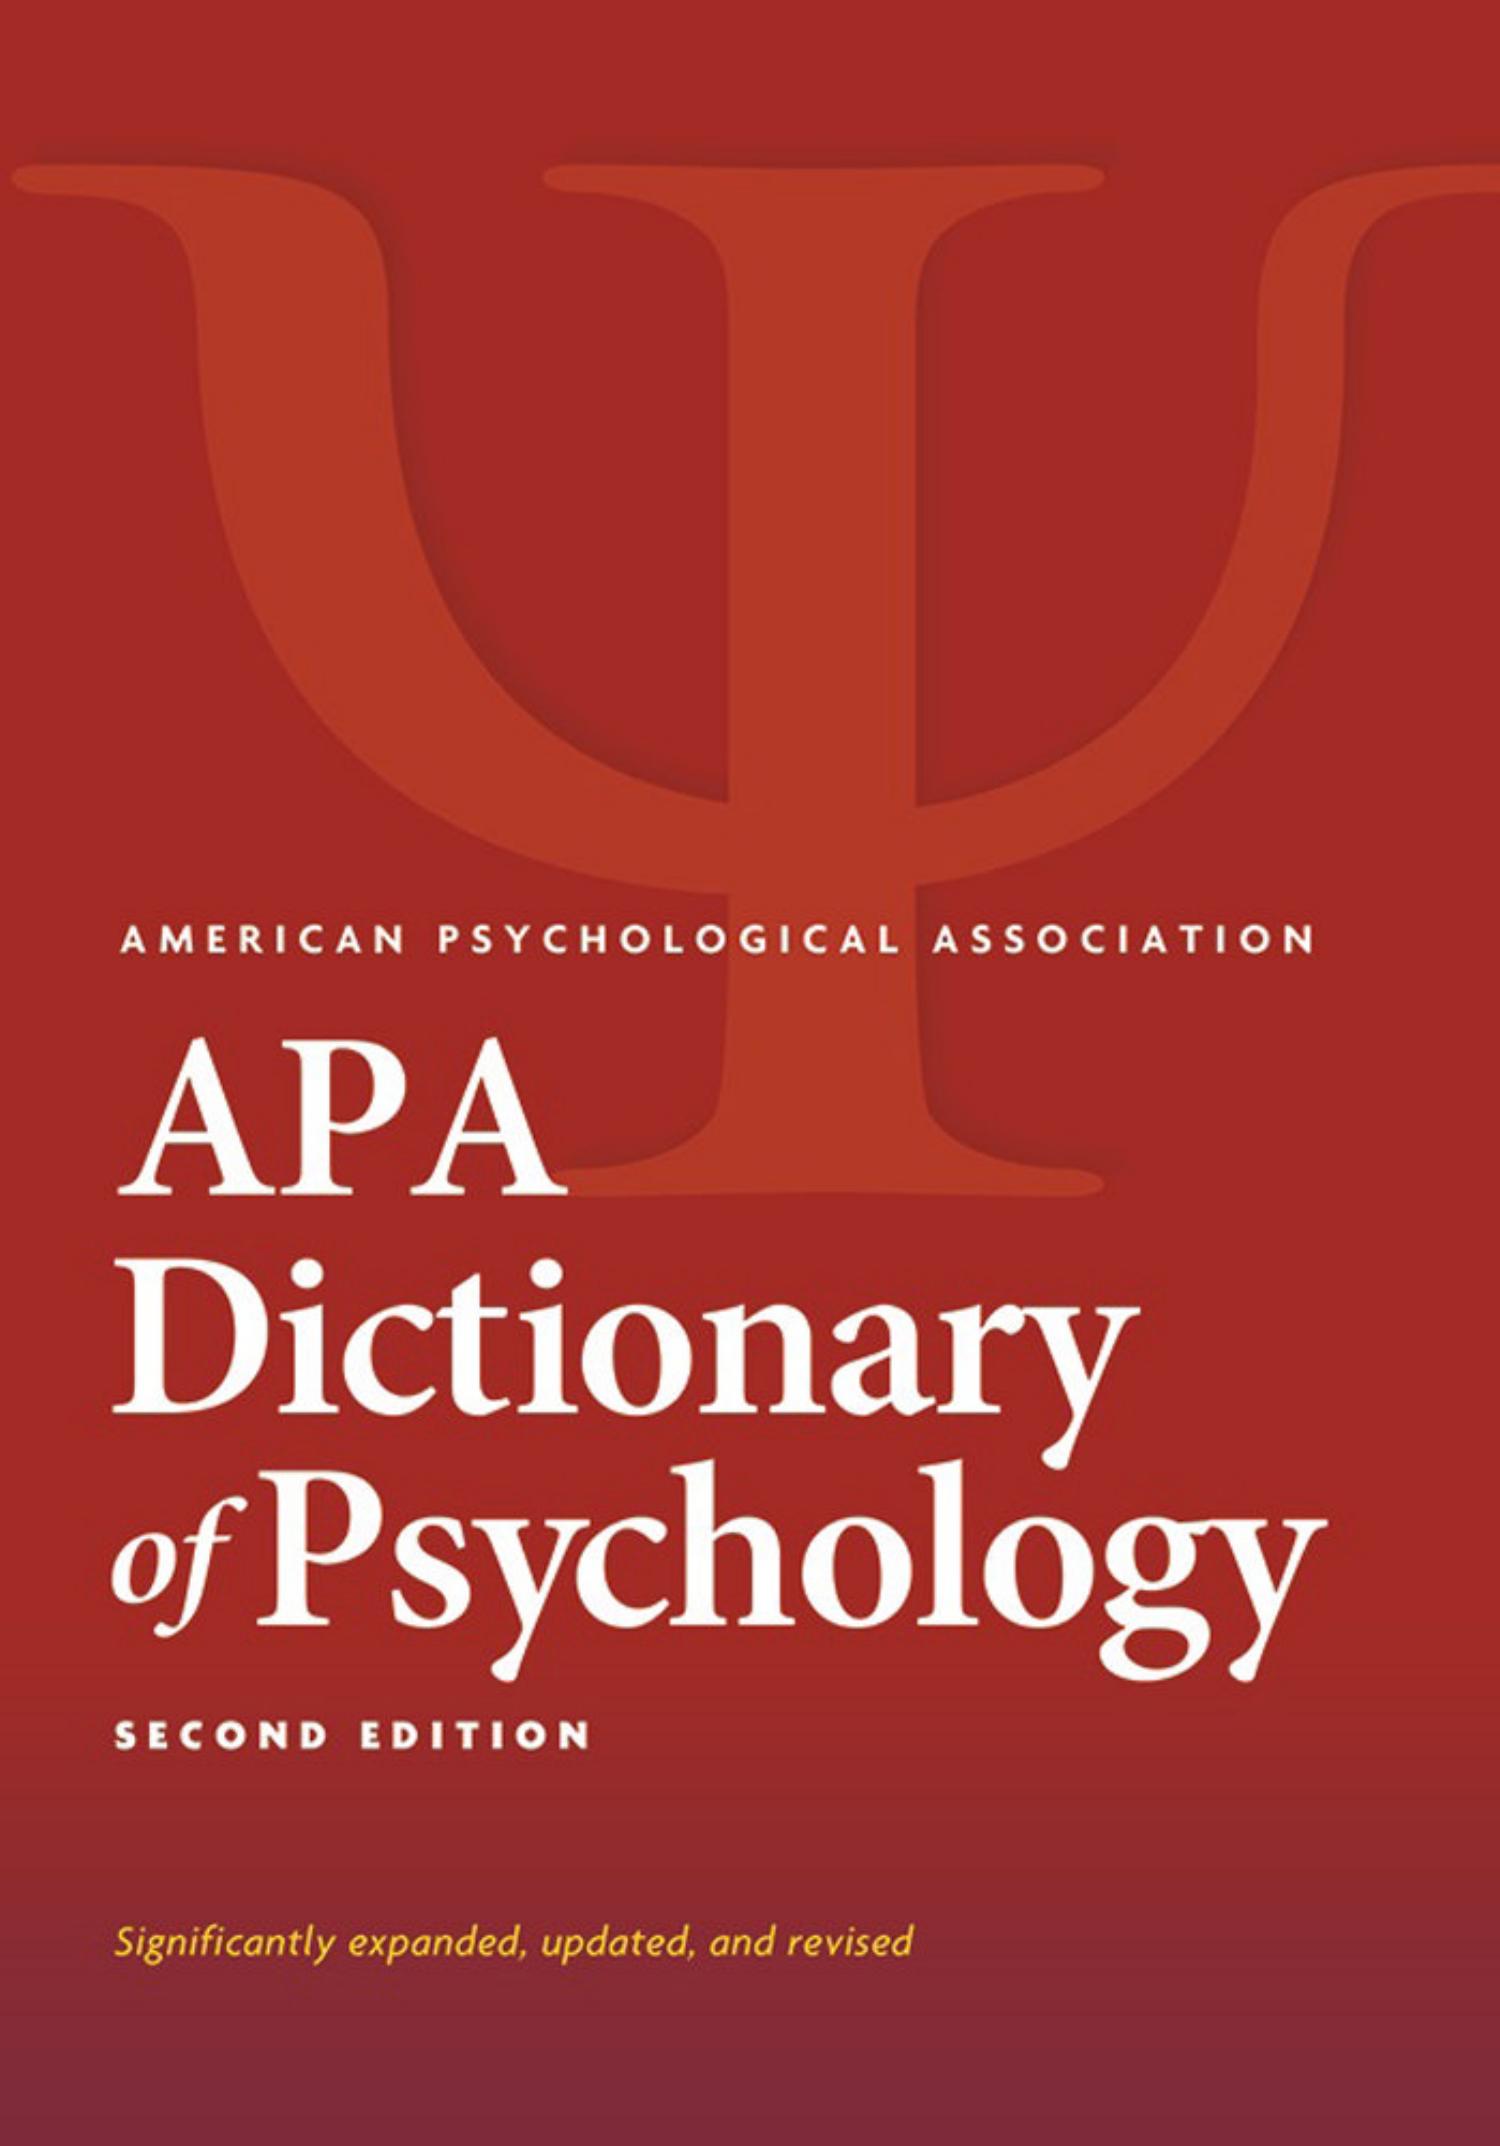 APA Dictionary of Psychology 2nd Ed [2015].pdf DocDroid